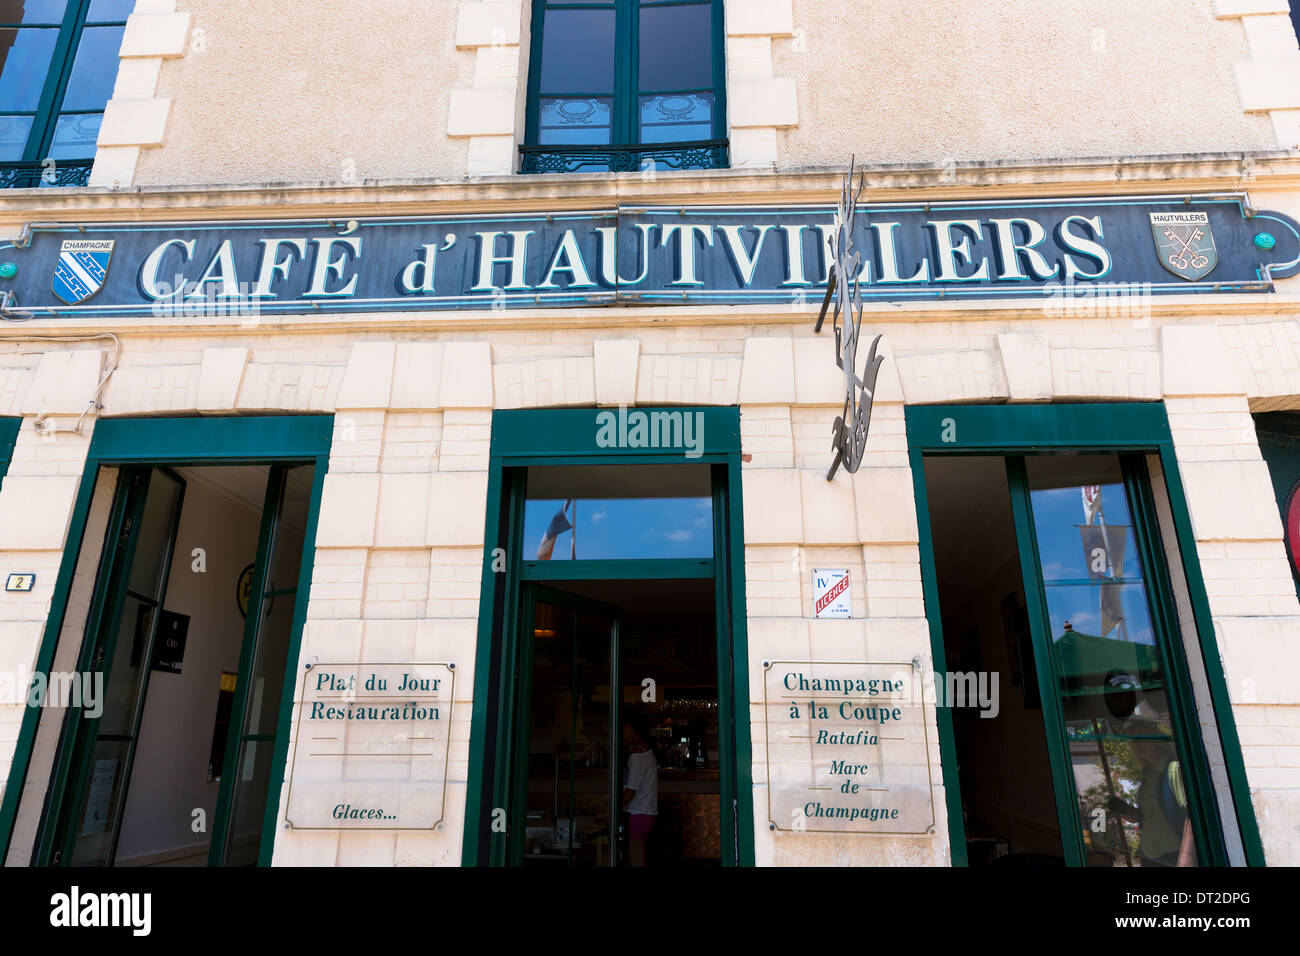 Traditional French cafe, Cafe d'Hautvillers on Champagne Tourist Route in Hautvillers near Epernay, Champagne-Ardenne, France Stock Photo